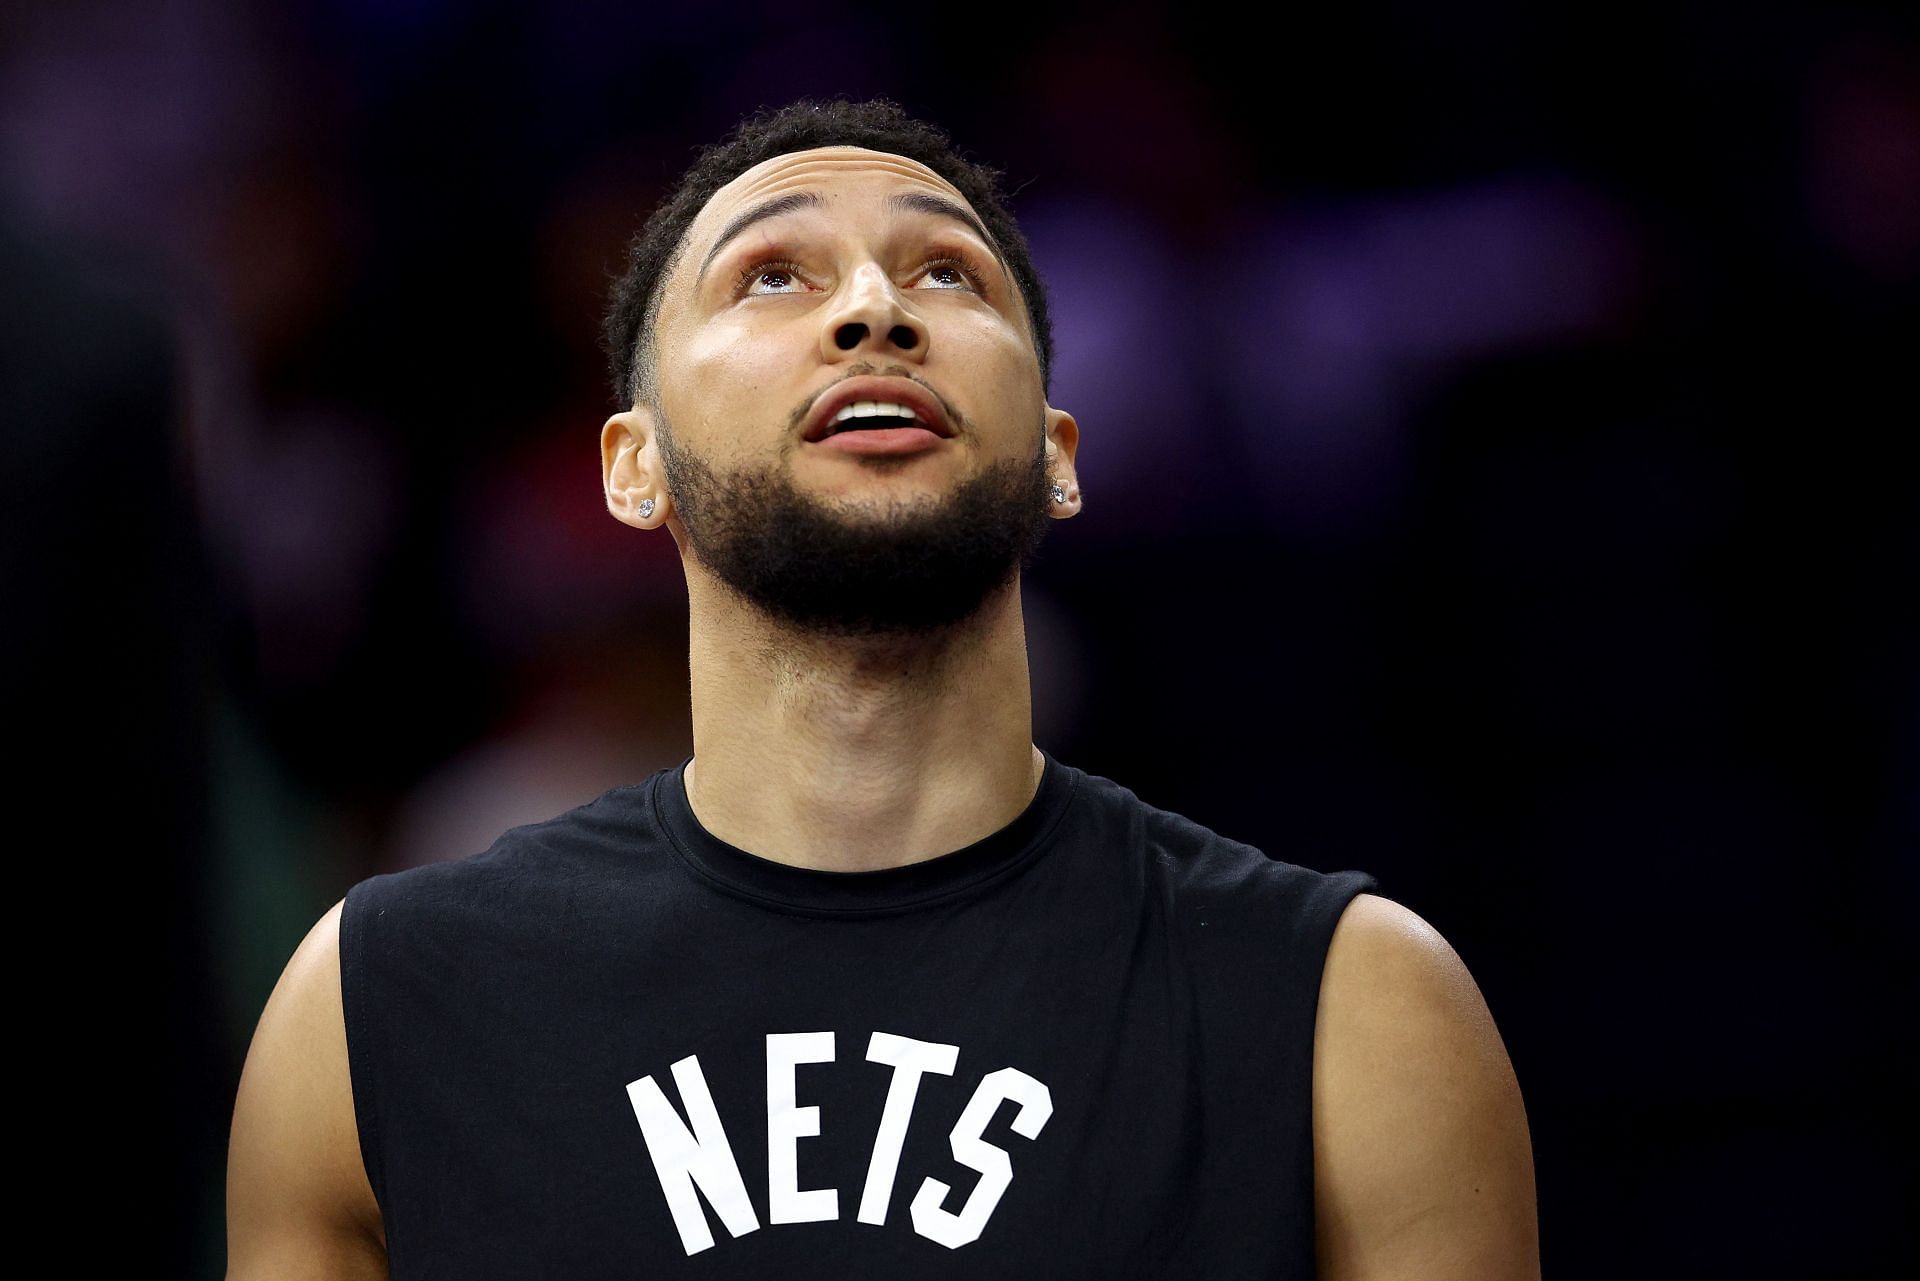 BenWatch: Ben Simmons Unmoved By Attempts At Pretending To Placate